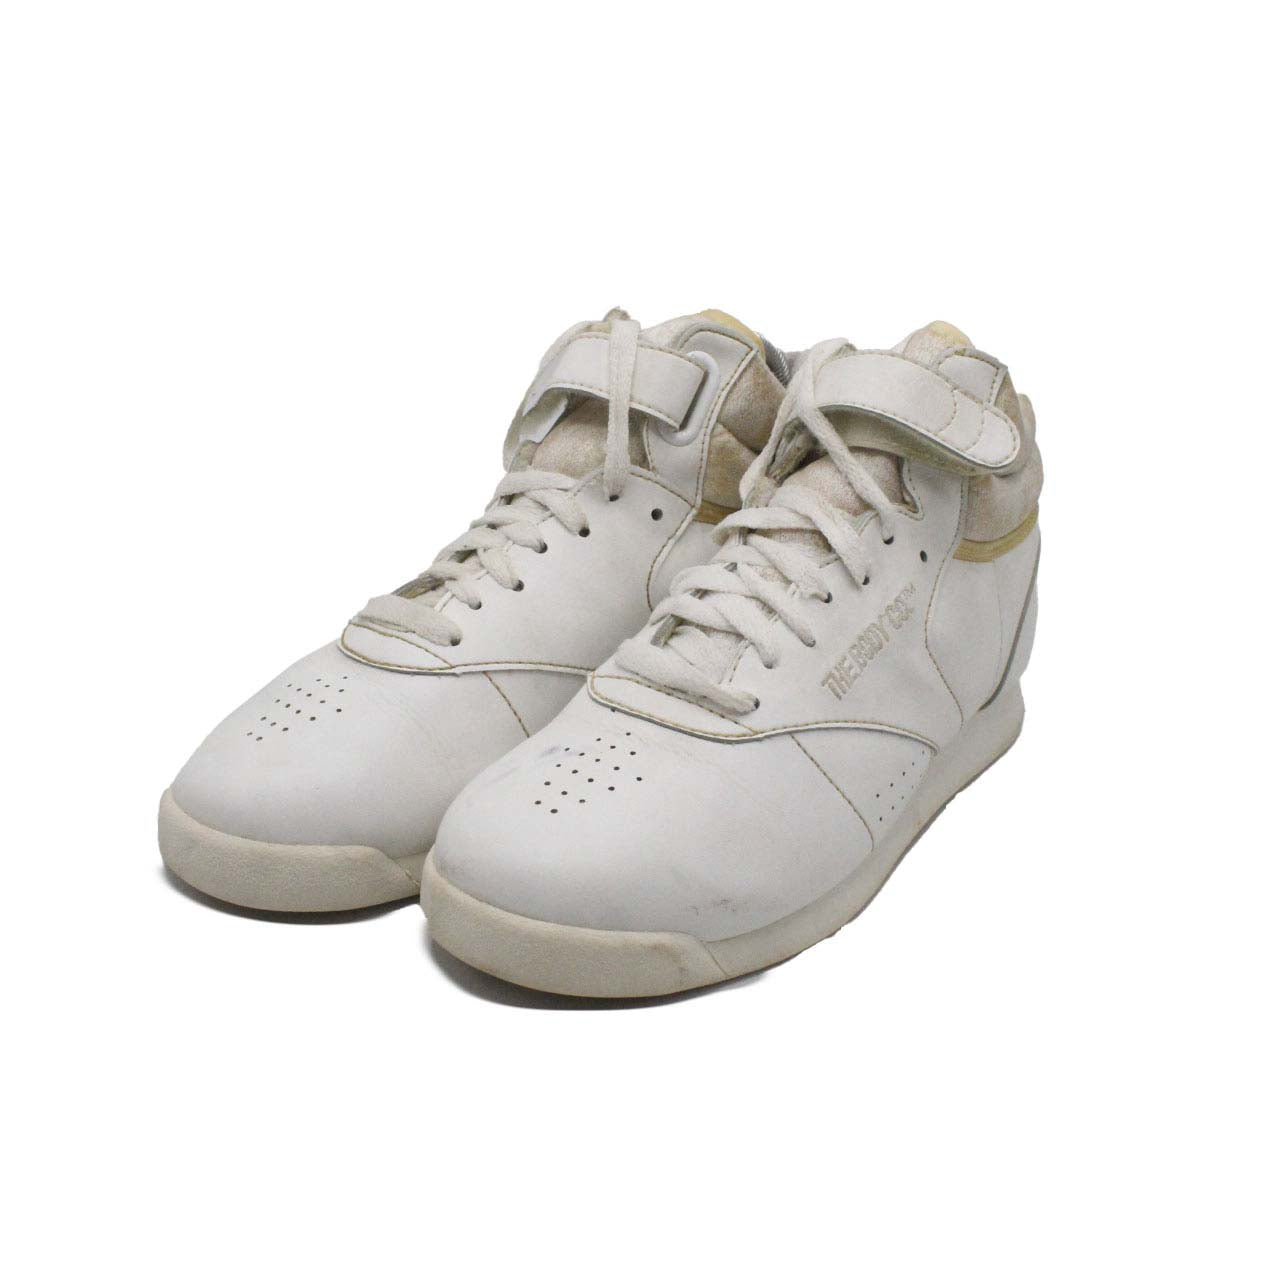 THE BODY CO HIGH TOP SNEAKERS